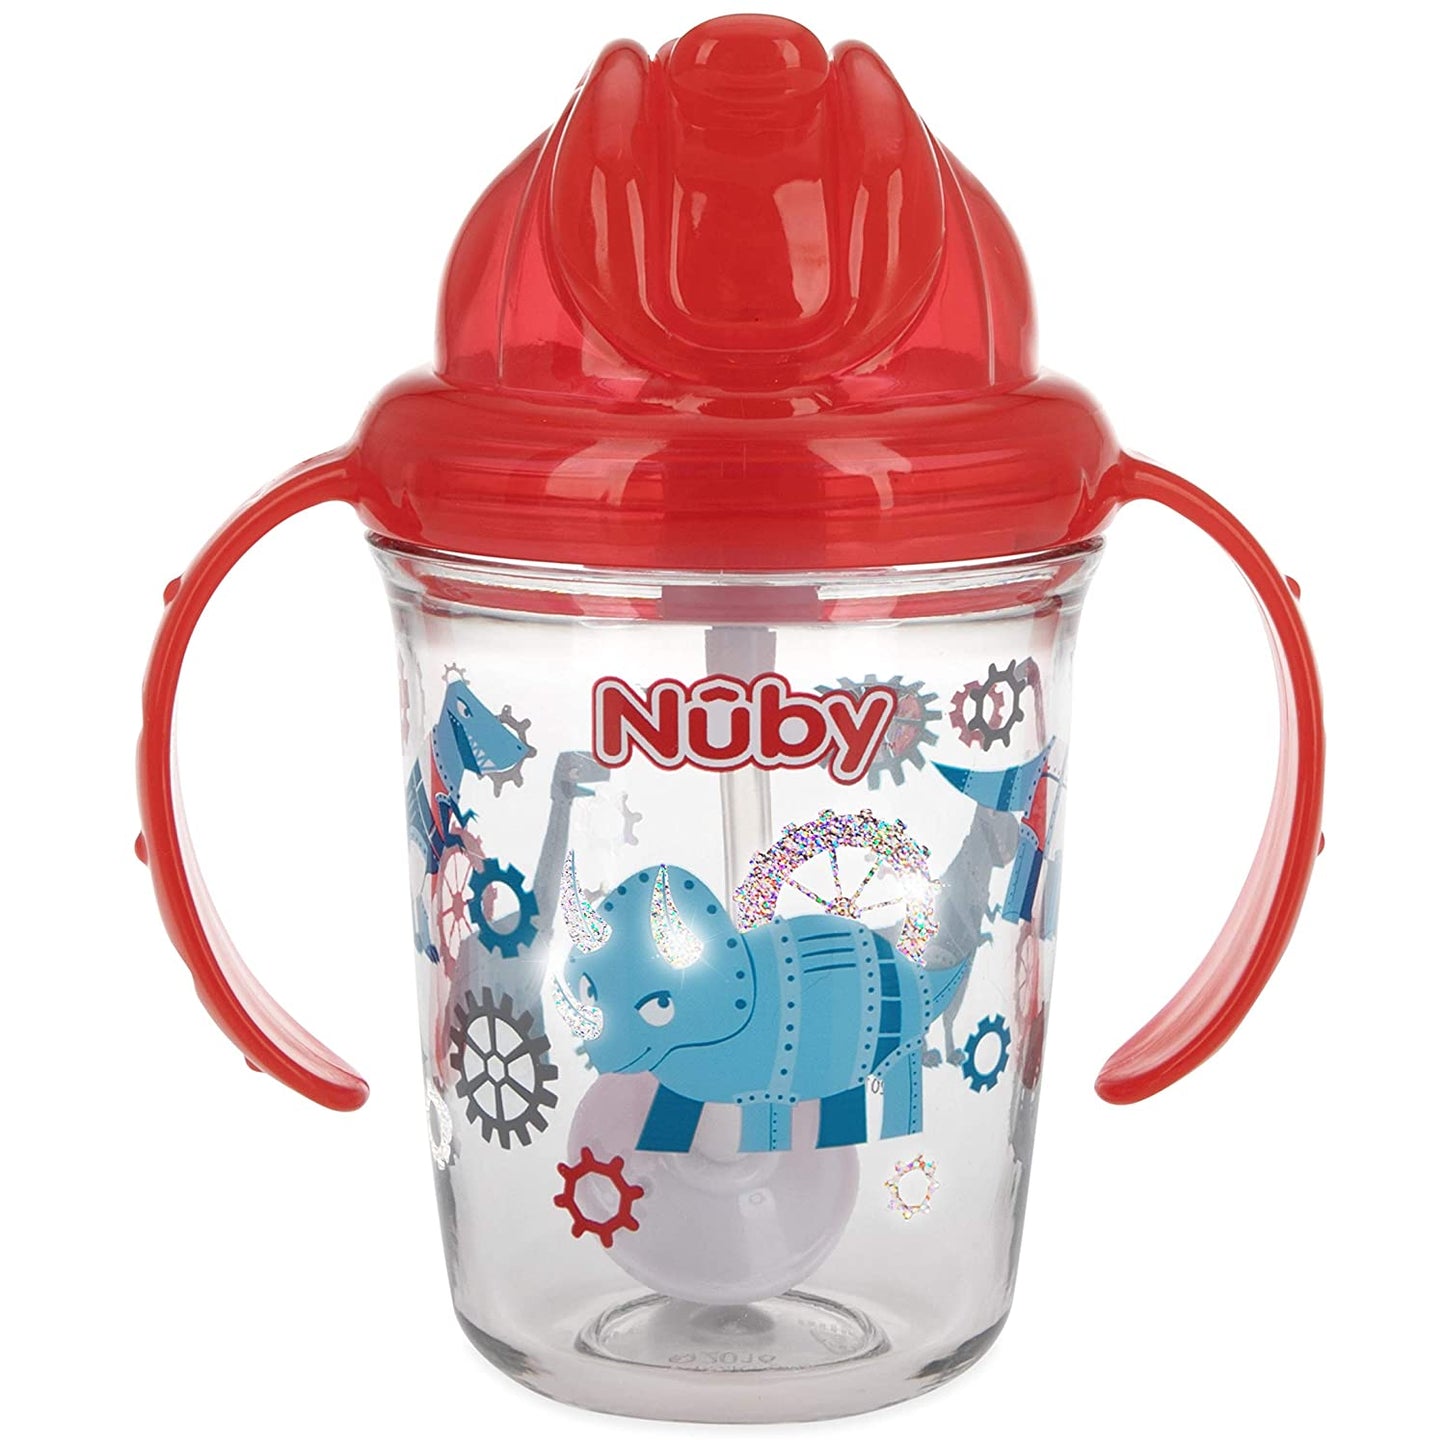 Nuby No Spill Flip N Sip 2 Handle Tritan 360 Weighted Straw Glitter Print - 8oz/ 240 Ml/ 12 M+, Colors Vary: Blue Space, Red Dinosaur, Pink Fox, Green Swan